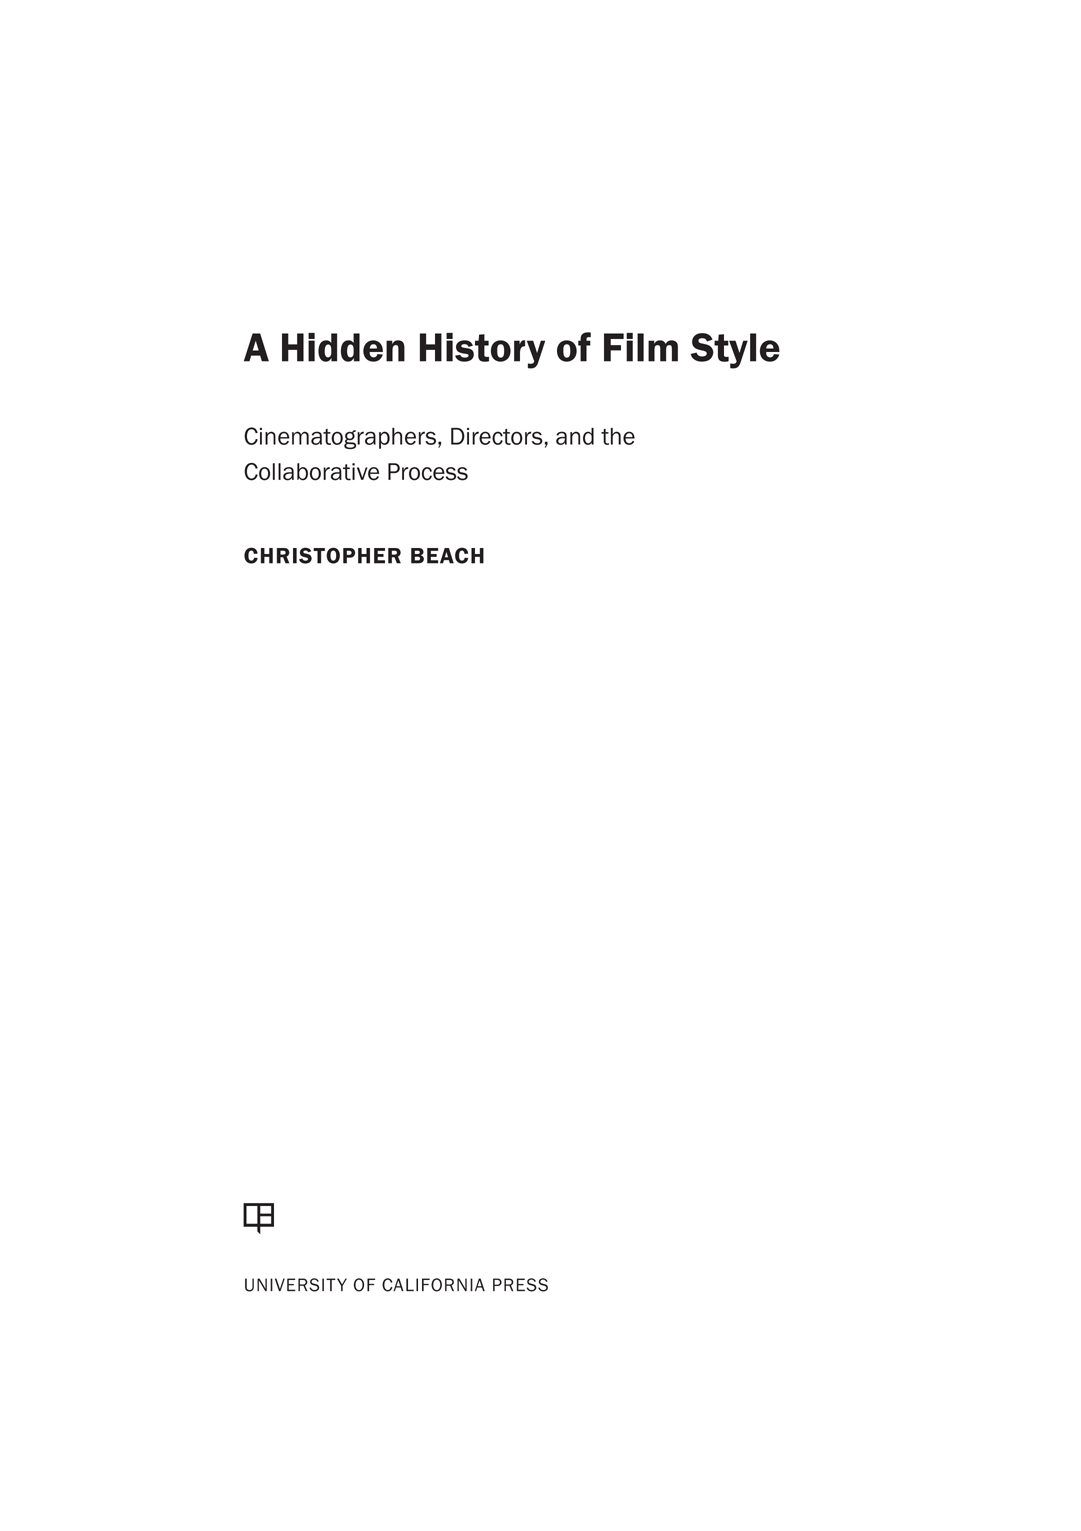 A HIDDEN HISTORY OF FILM STYLE The publisher gratefully acknowledges the - photo 1